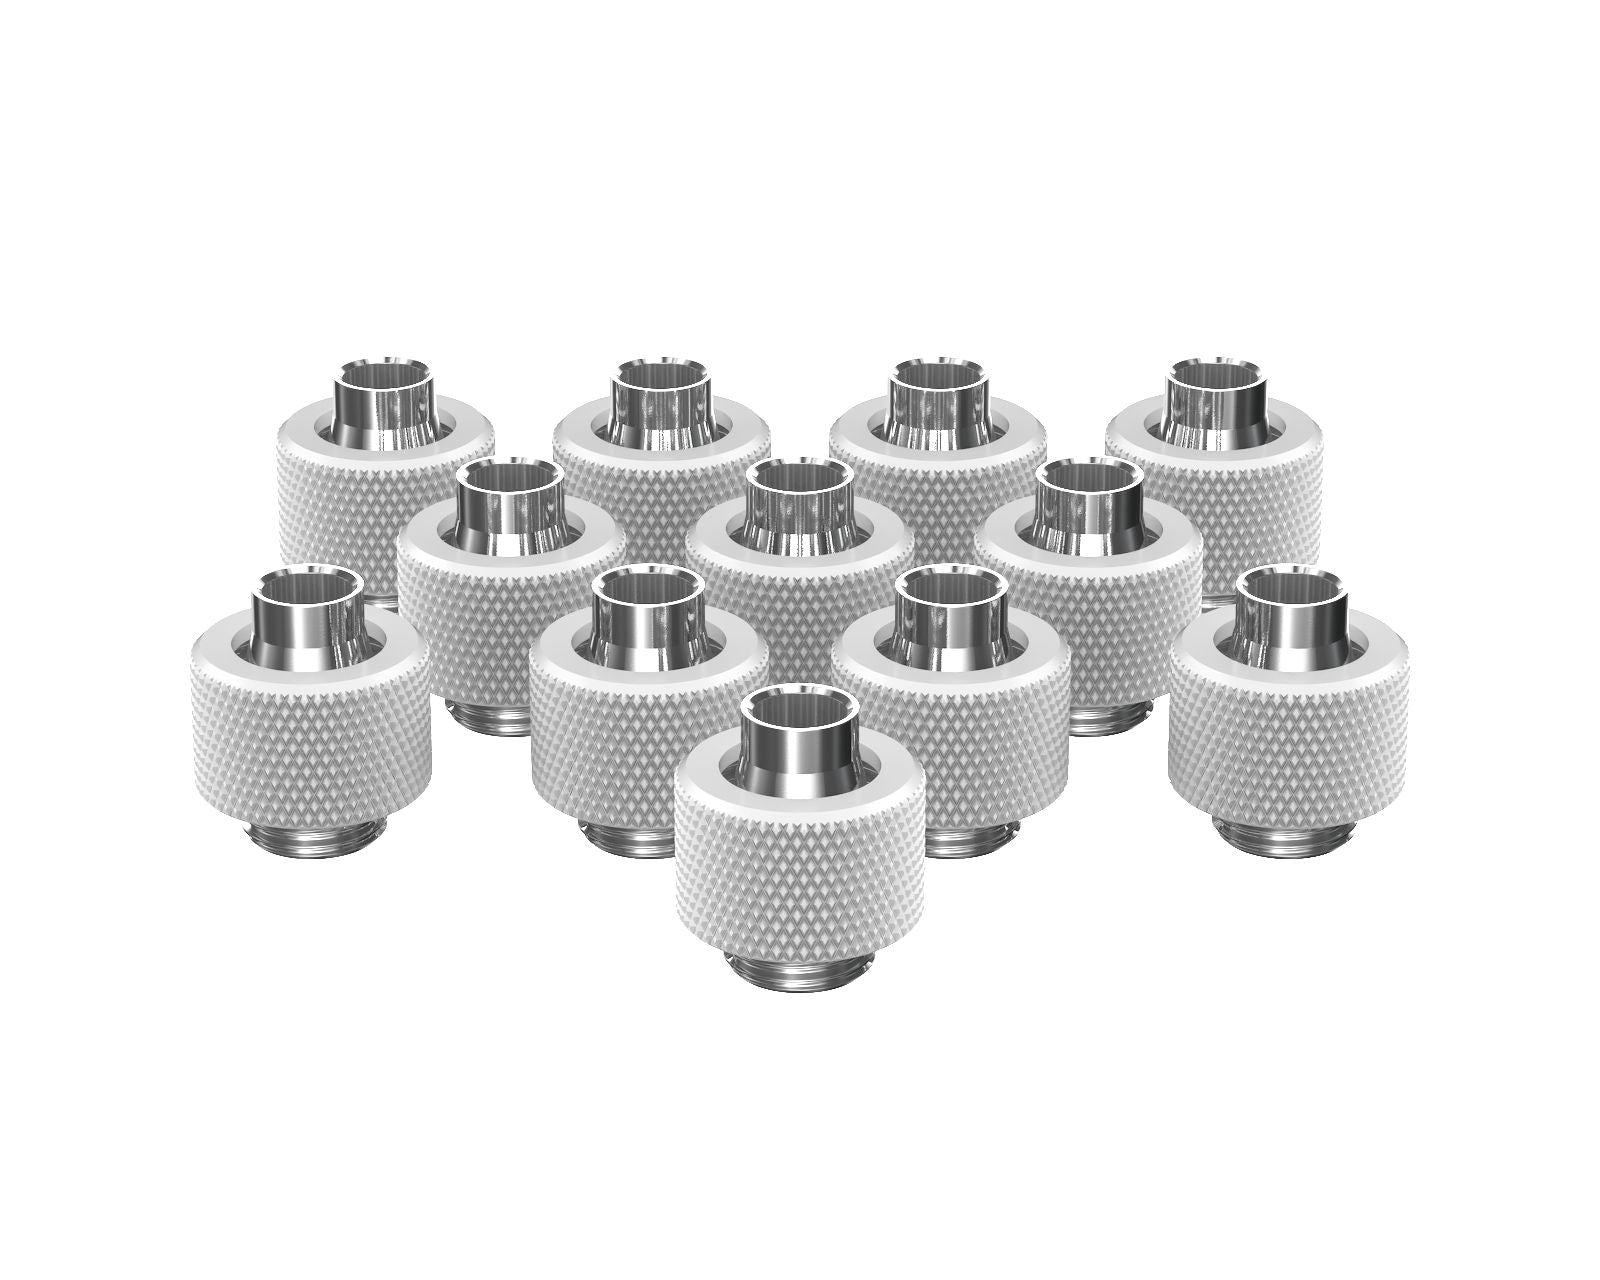 PrimoChill SecureFit SX - Premium Compression Fitting For 3/8in ID x 1/2in OD Flexible Tubing 12 Pack (F-SFSX12-12) - Available in 20+ Colors, Custom Watercooling Loop Ready - Sky White